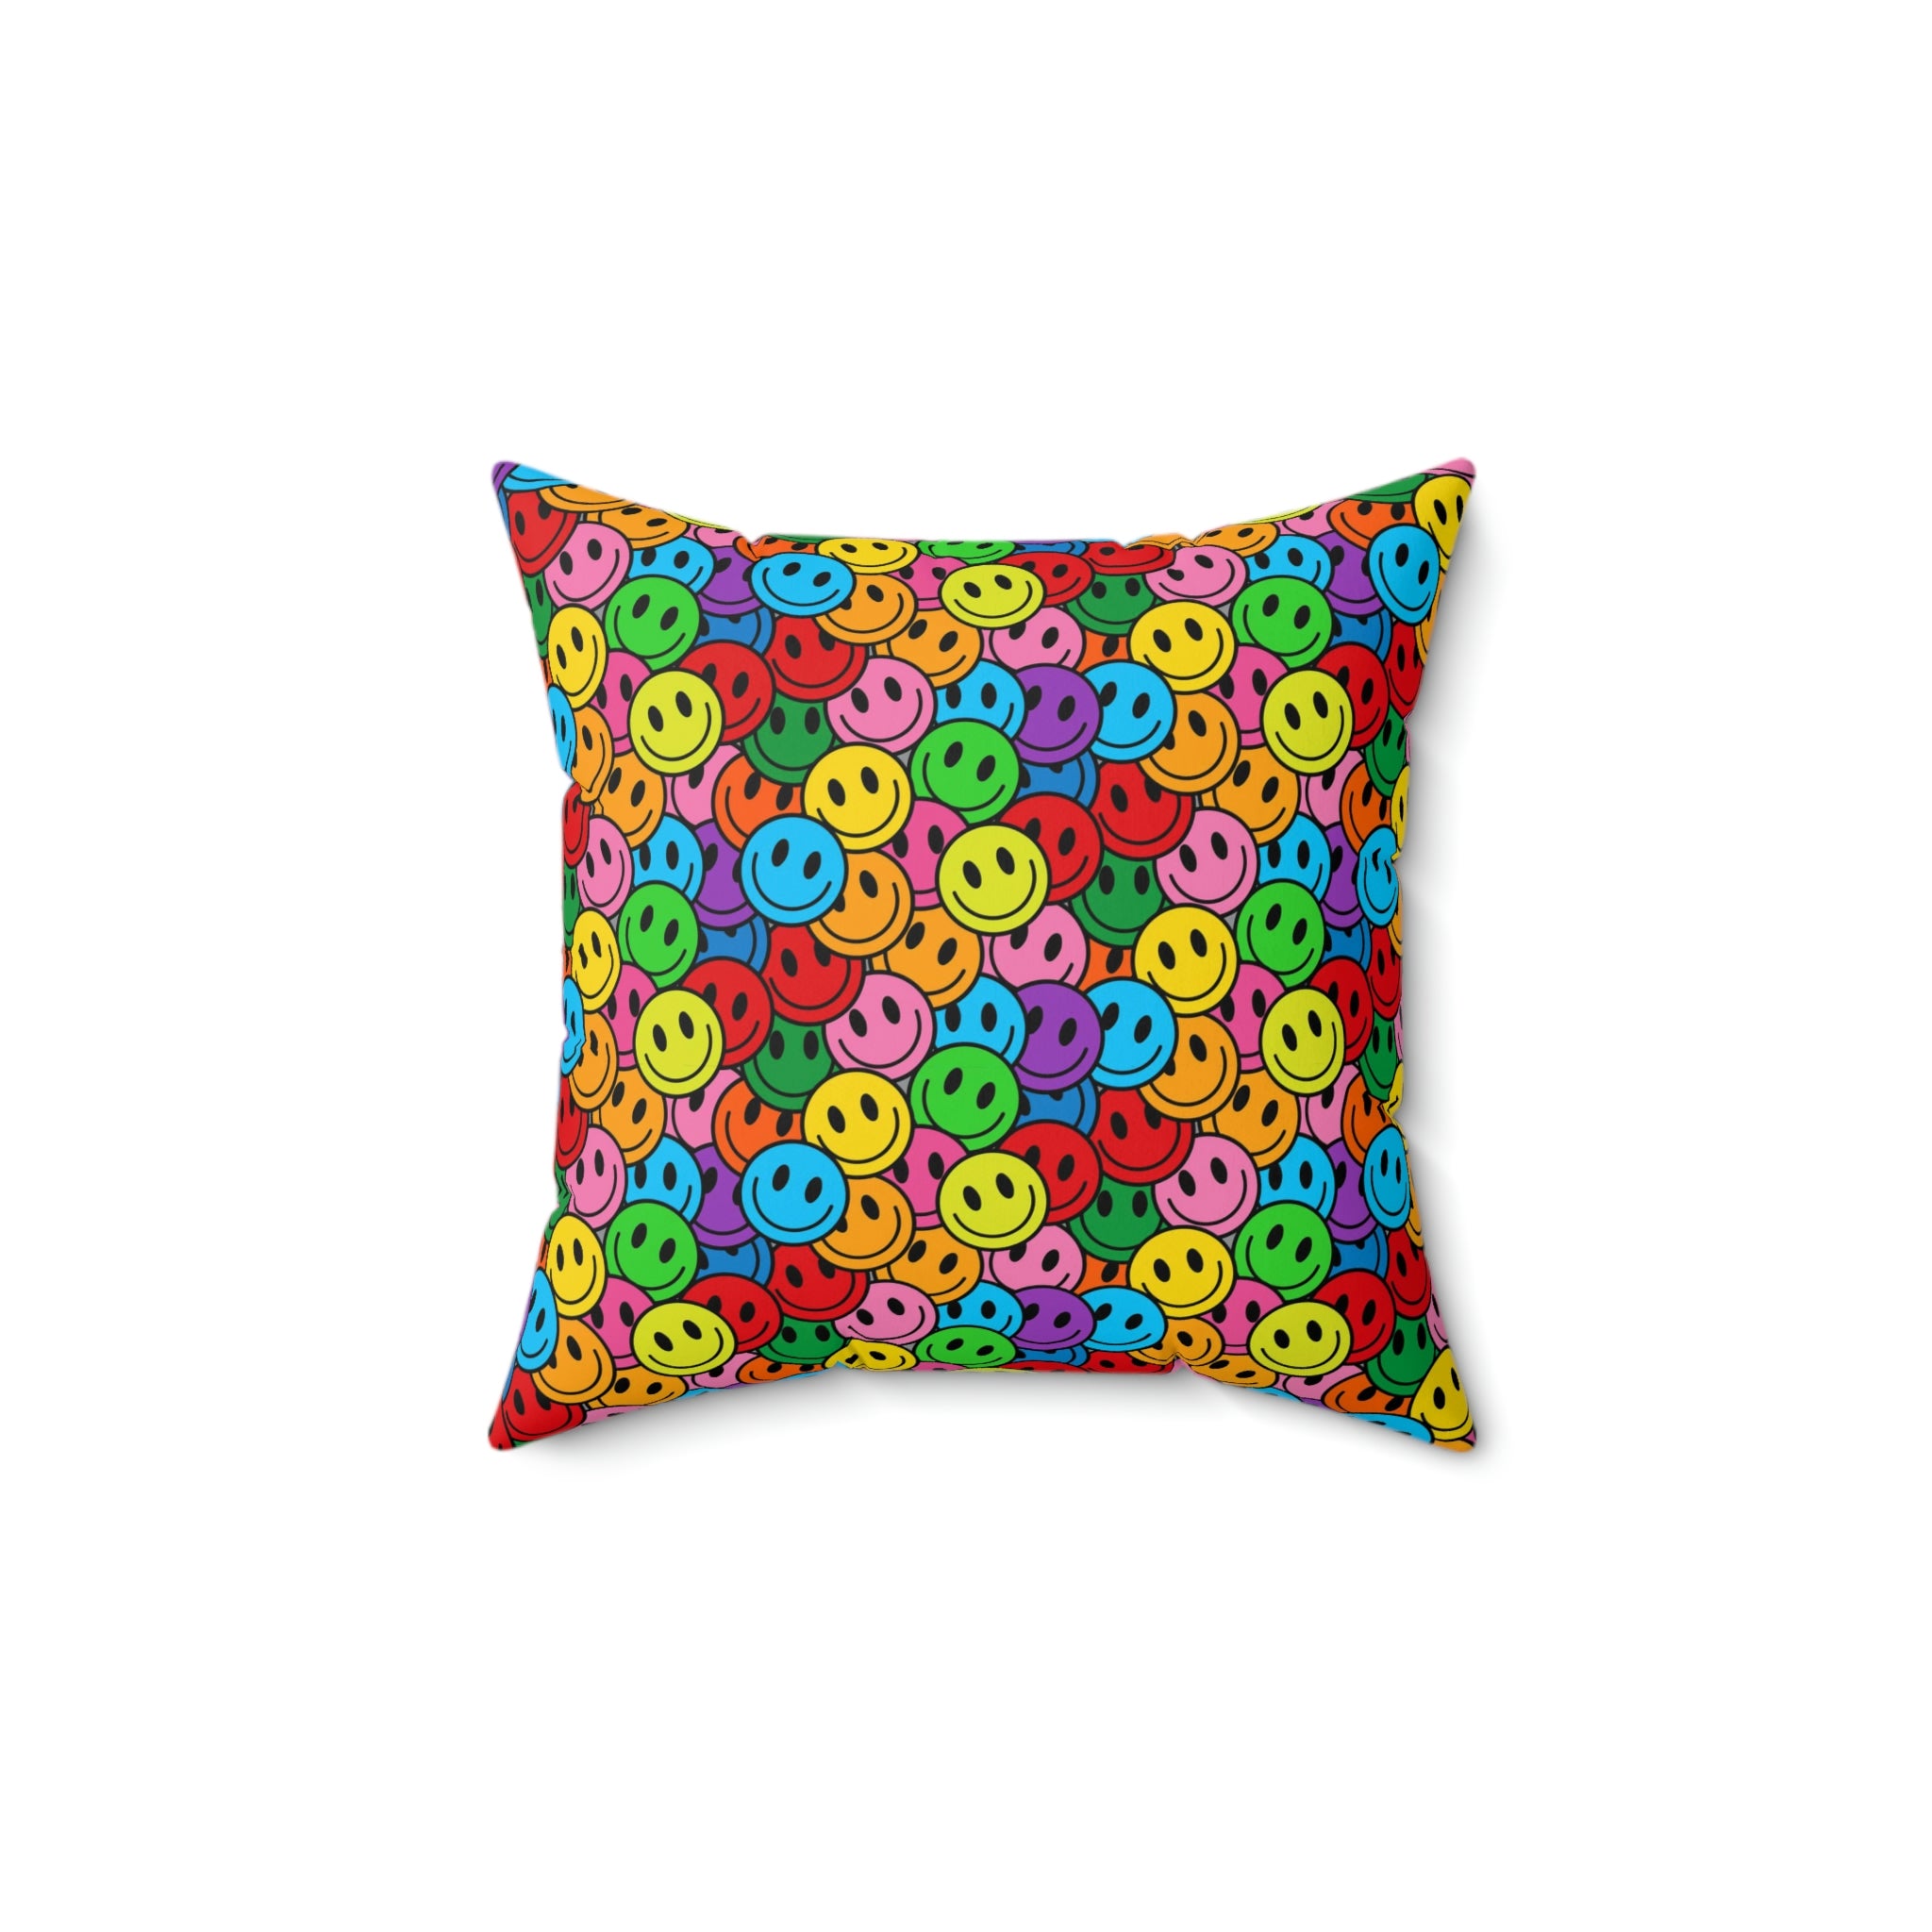 Spun Polyester Pillow Happy Face rainbow colors pattern s